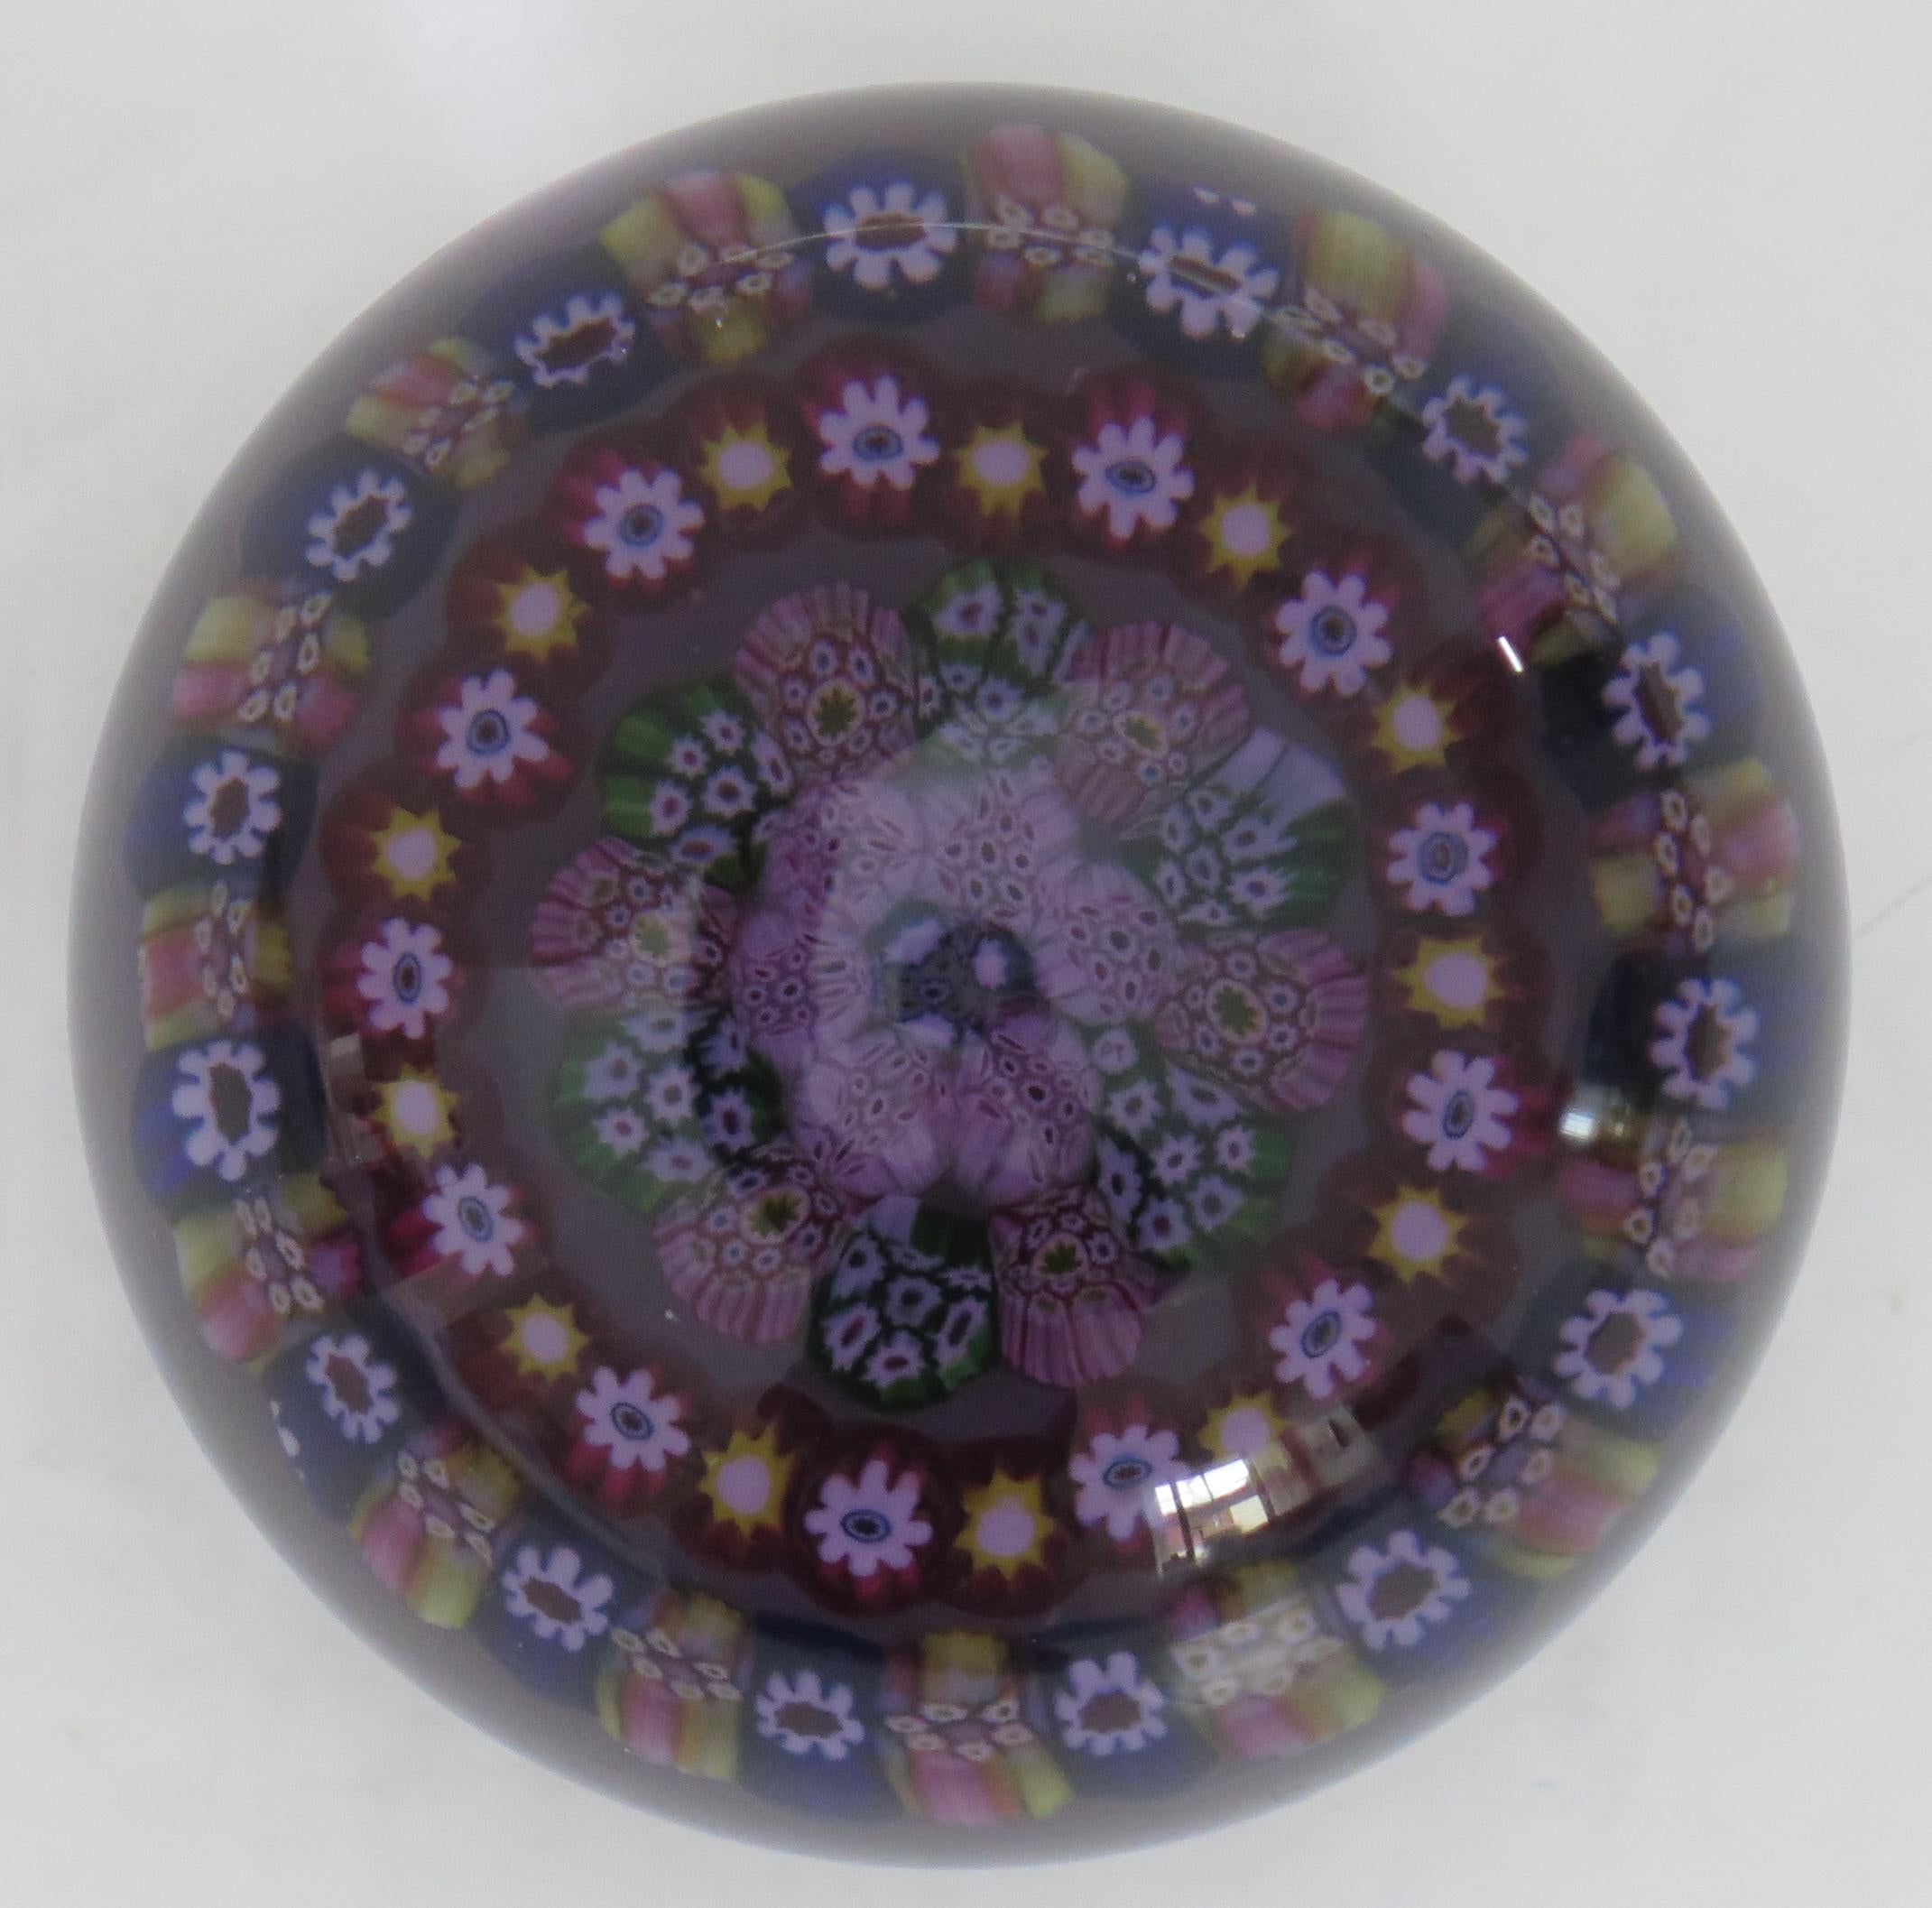 This is a beautiful handmade concentric Millefiori, PY cane, Dark Glass Paperweight made by Paul Ysart in Scotland, during his early period, Circa 1930s.

The canes are arranged as two open concentric rings around a six spoke tightly packed centre